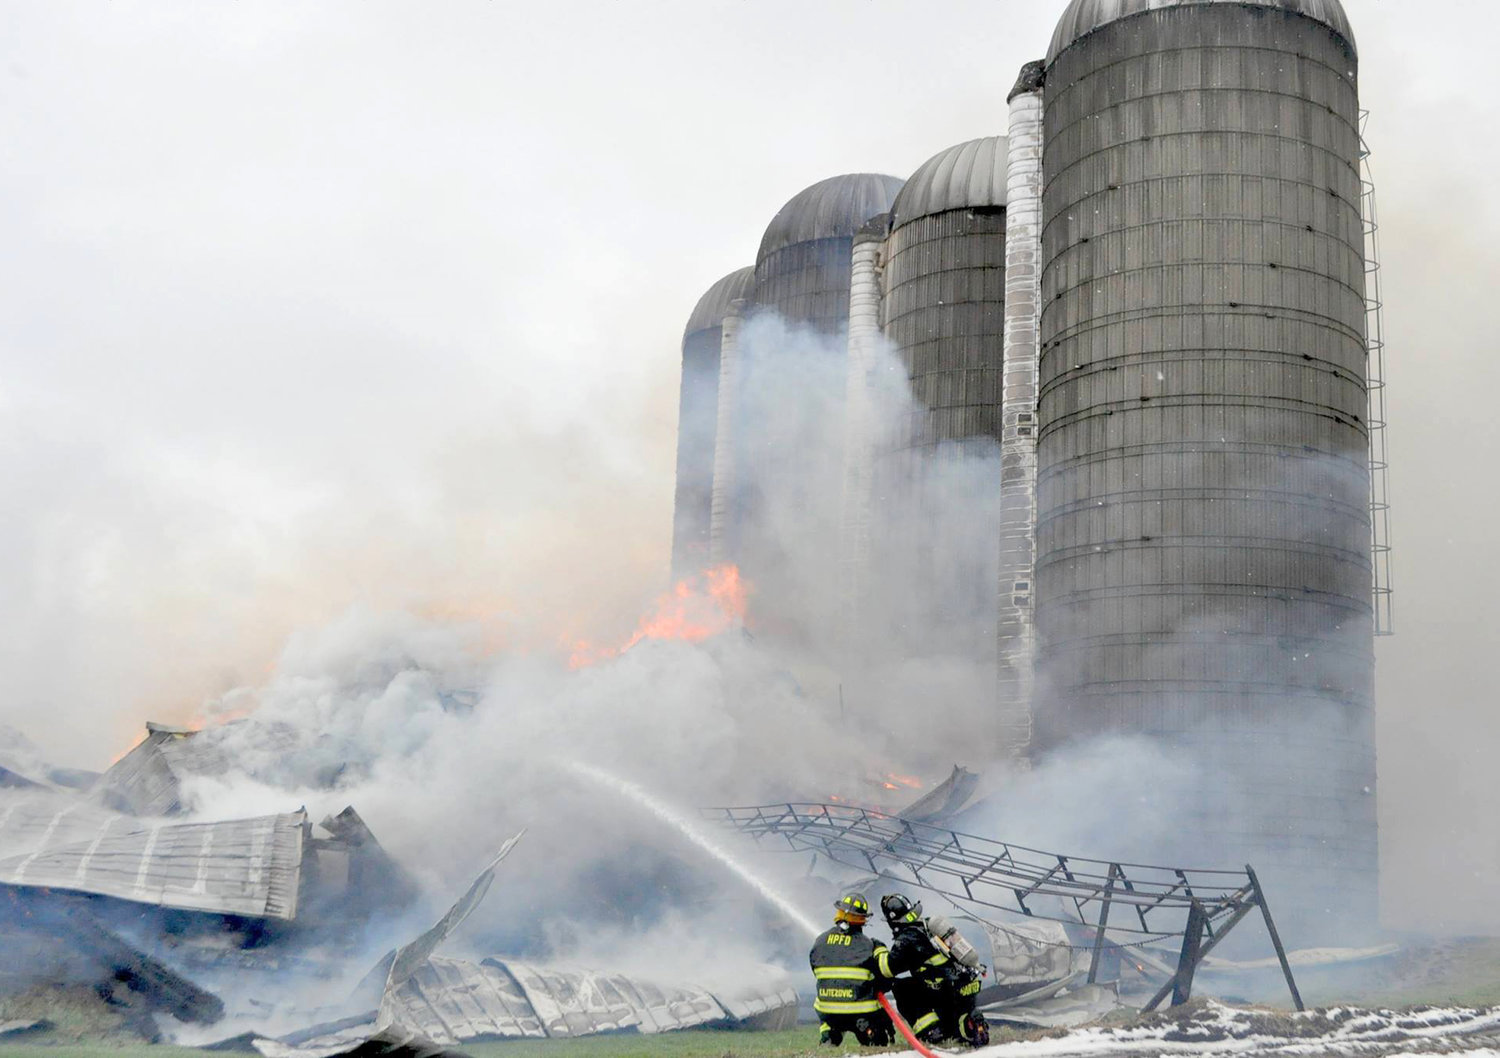 BARN DESTROYED —Local firefighters spray down a smoldering tin roof after a 60-foot by 200-foot cow barn was destroyed by fire on Whittaker Road in Trenton on Sunday. Fire officials said 250 head of cattle were killed in the blaze.